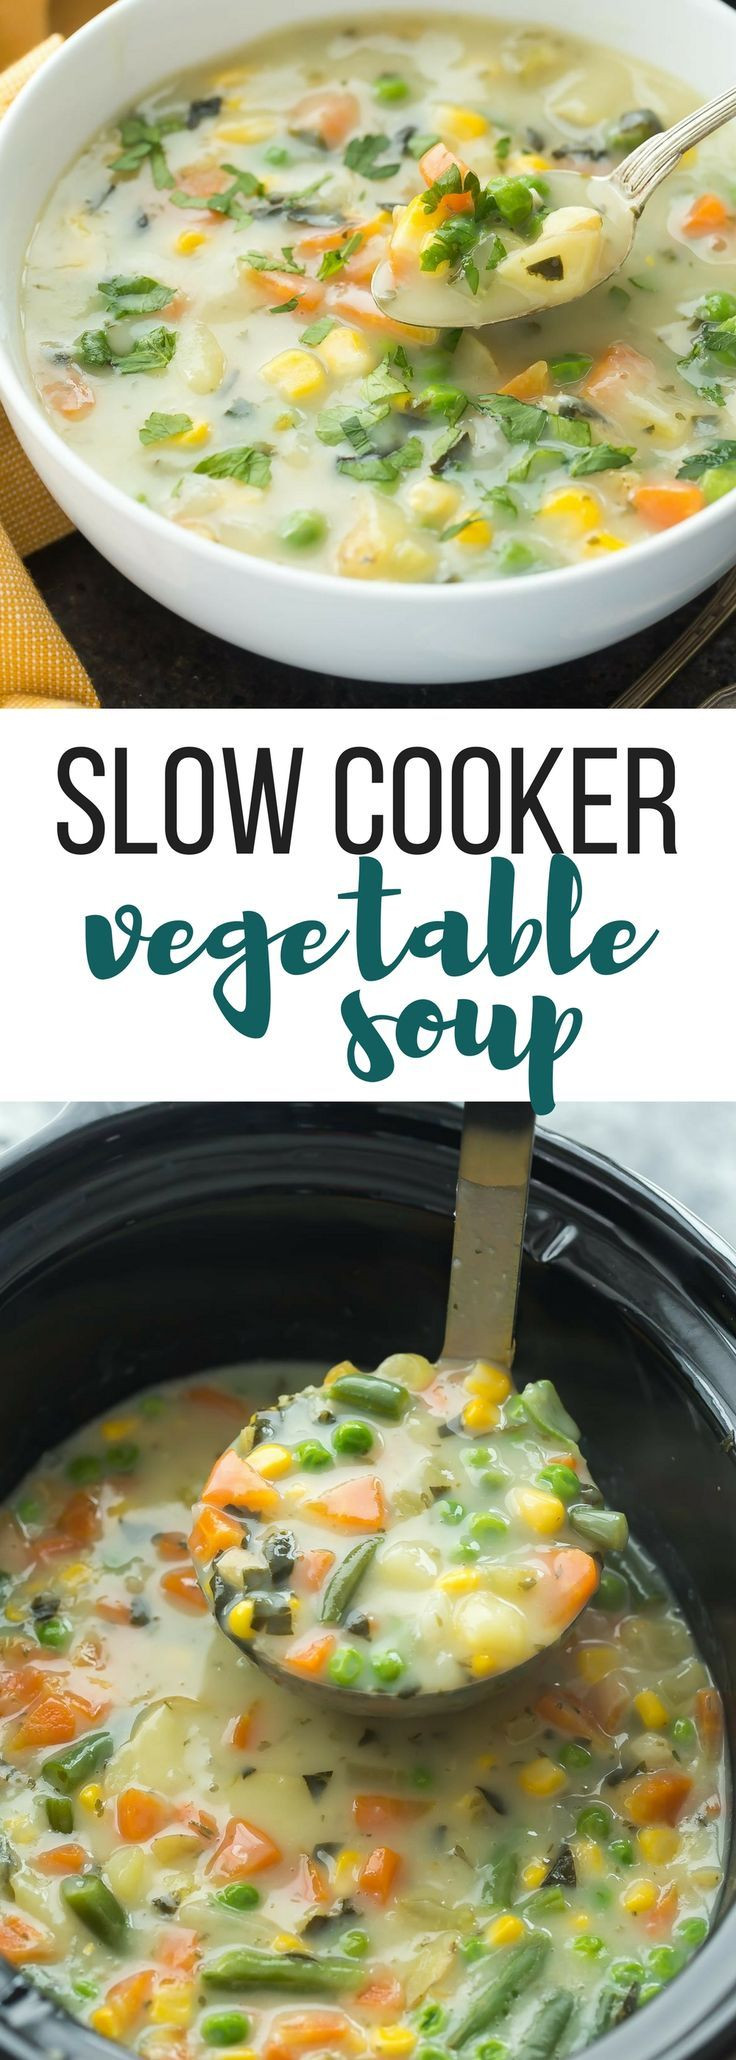 Healthy Crockpot Dinners
 25 best ideas about Creamy ve able soups on Pinterest